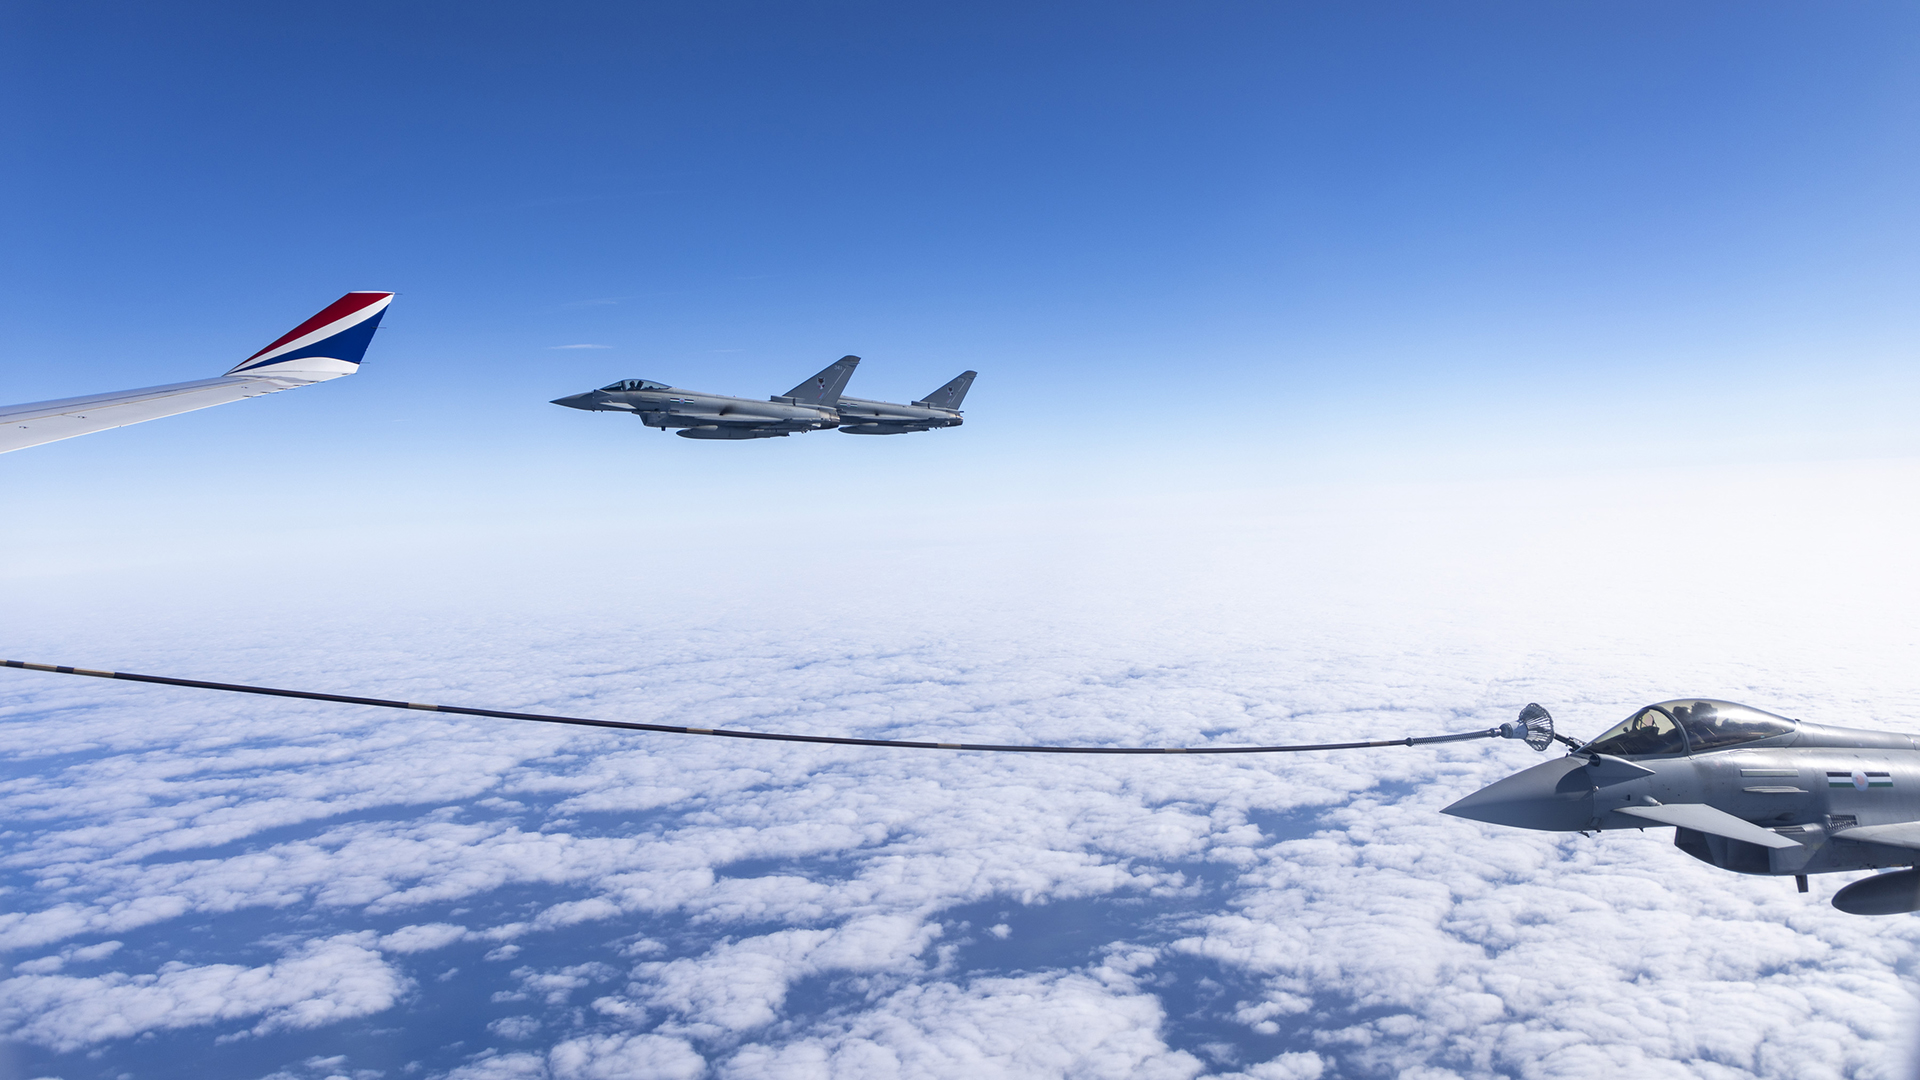 The Royal Air Force has successfully completed a Voyager air-to-air refuelling flight, powered by an approximately 43% blend of Sustainable Aviation Fuel (SAF).